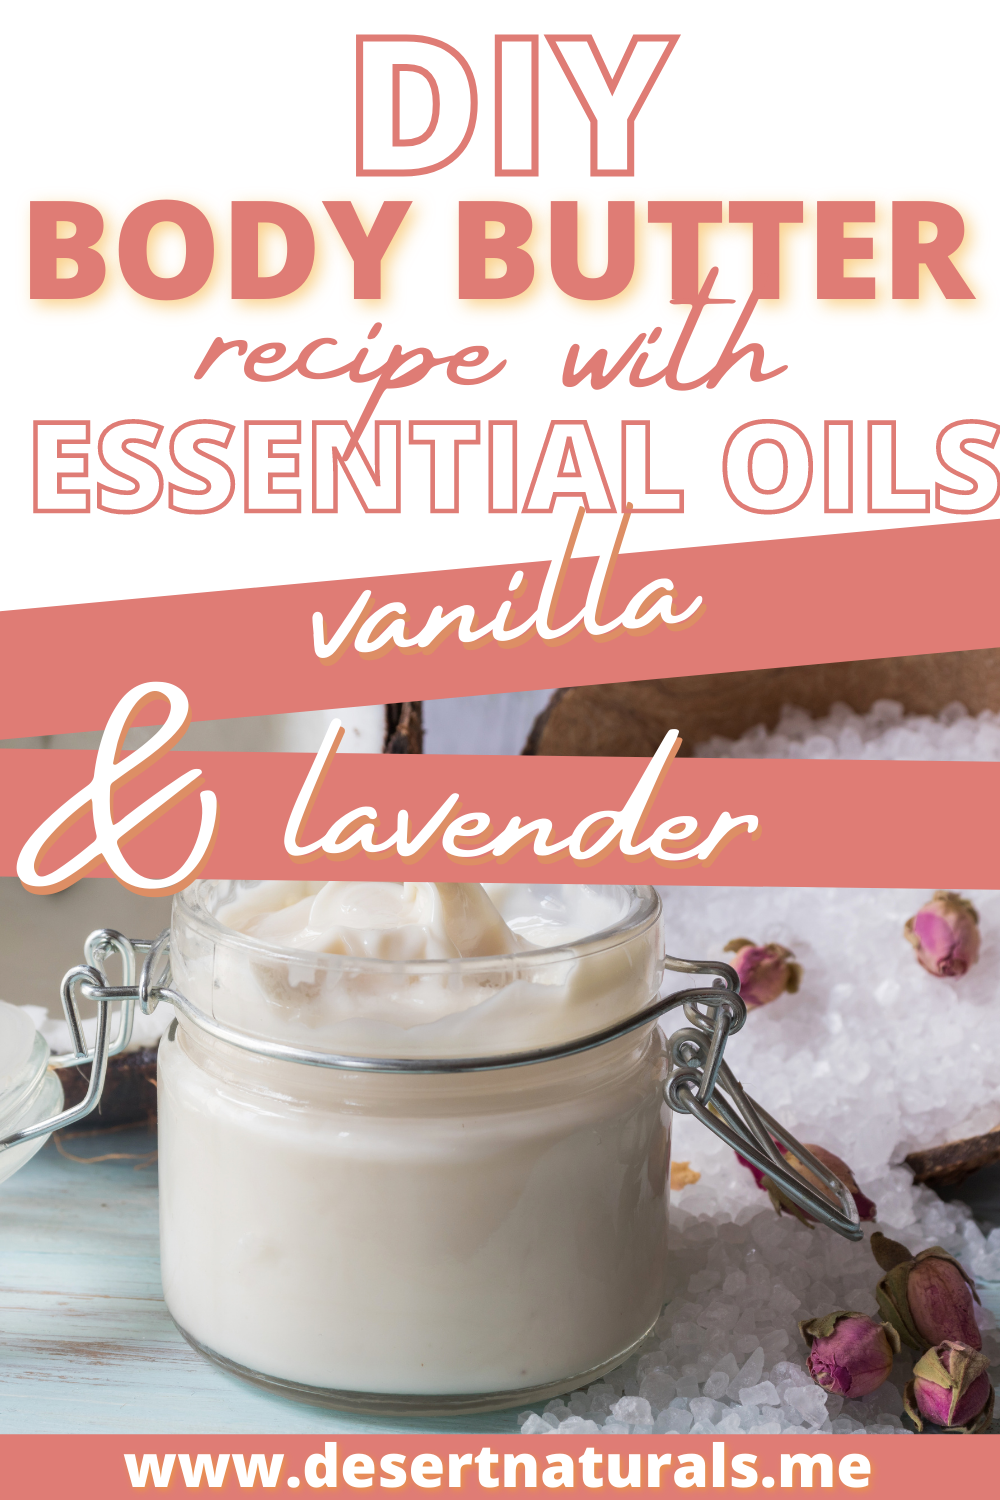 text diy body butter recipe with essential oils vanilla and lavender with a jar of homemade body butter and dried rose buds